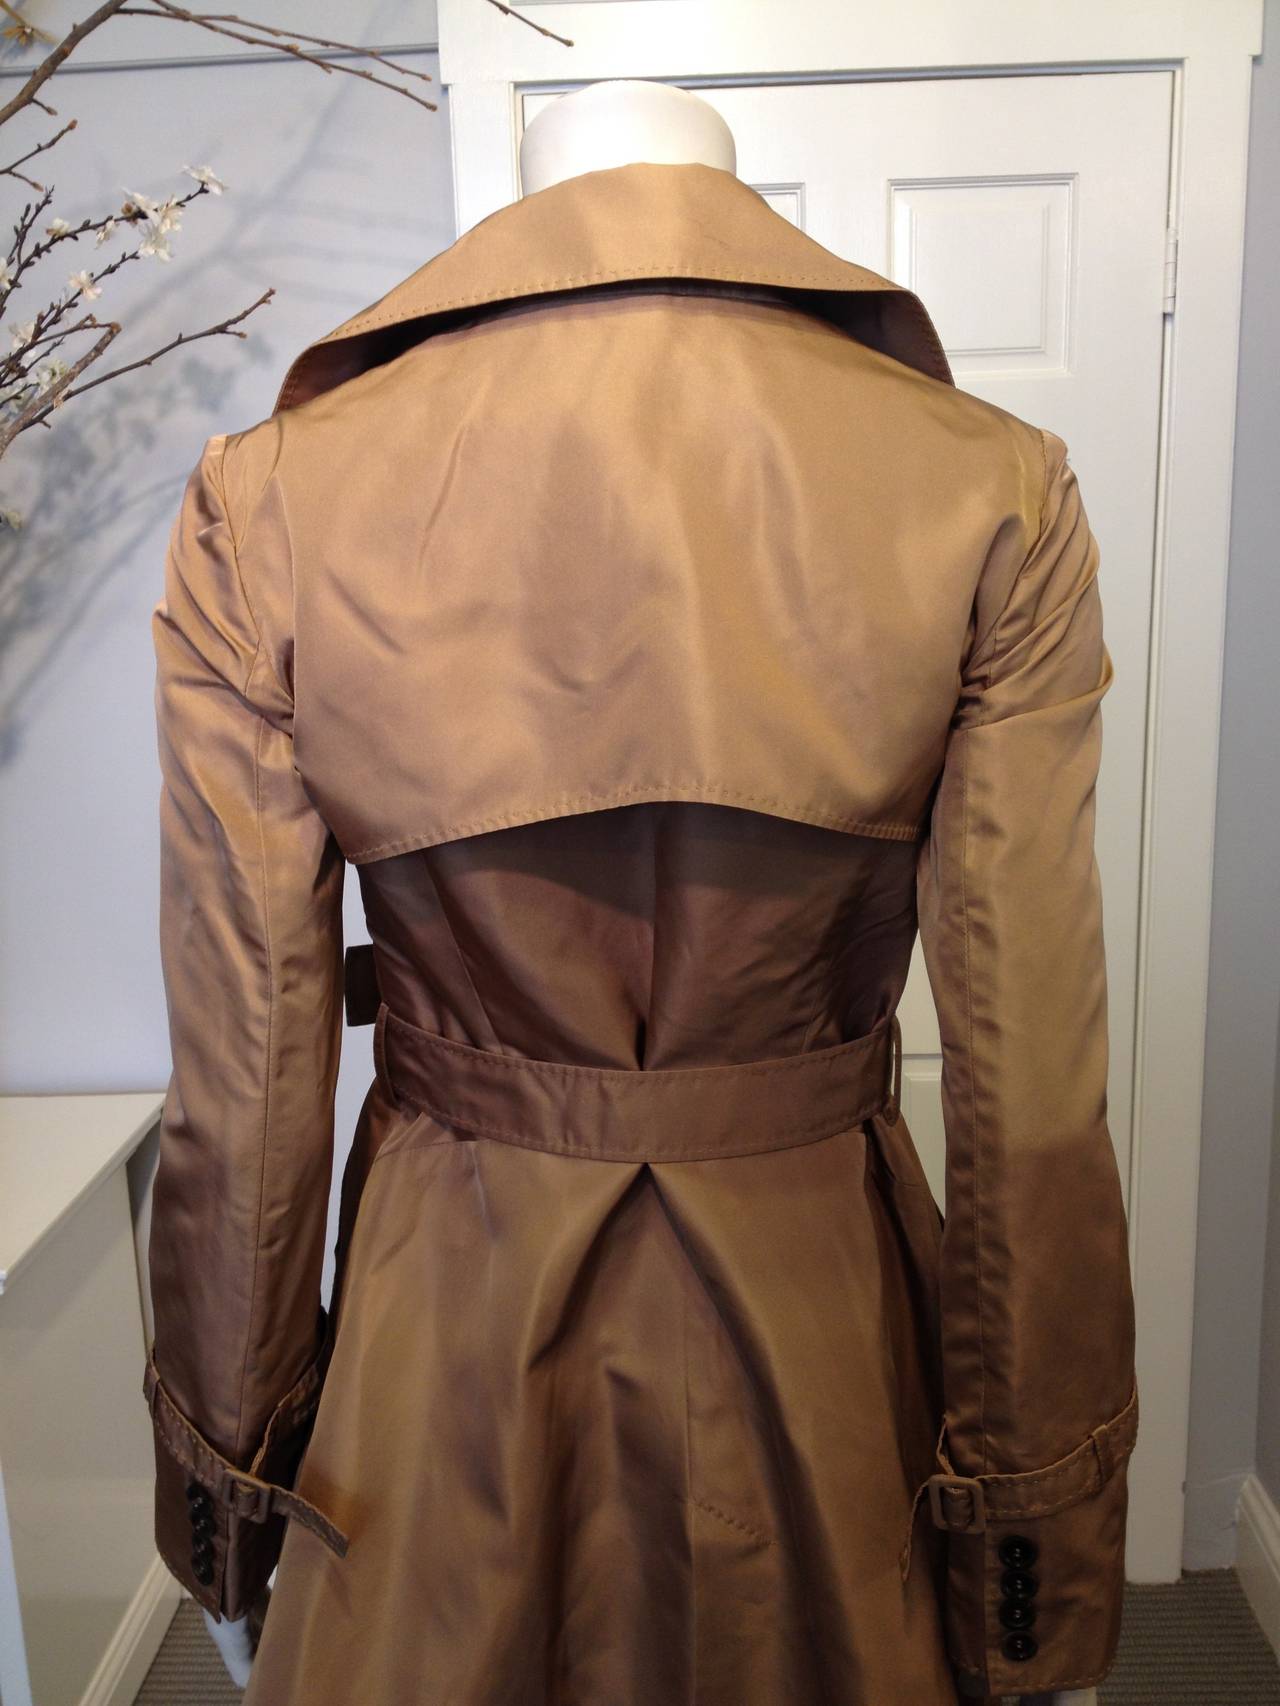 This is the coat for a true femme fatale. More curvy and stylized than a traditional trench coat, it features an asymmetrical line of buttons down the front that creates a dramatic angular opening toward the hemline, and accentuates the waist. The